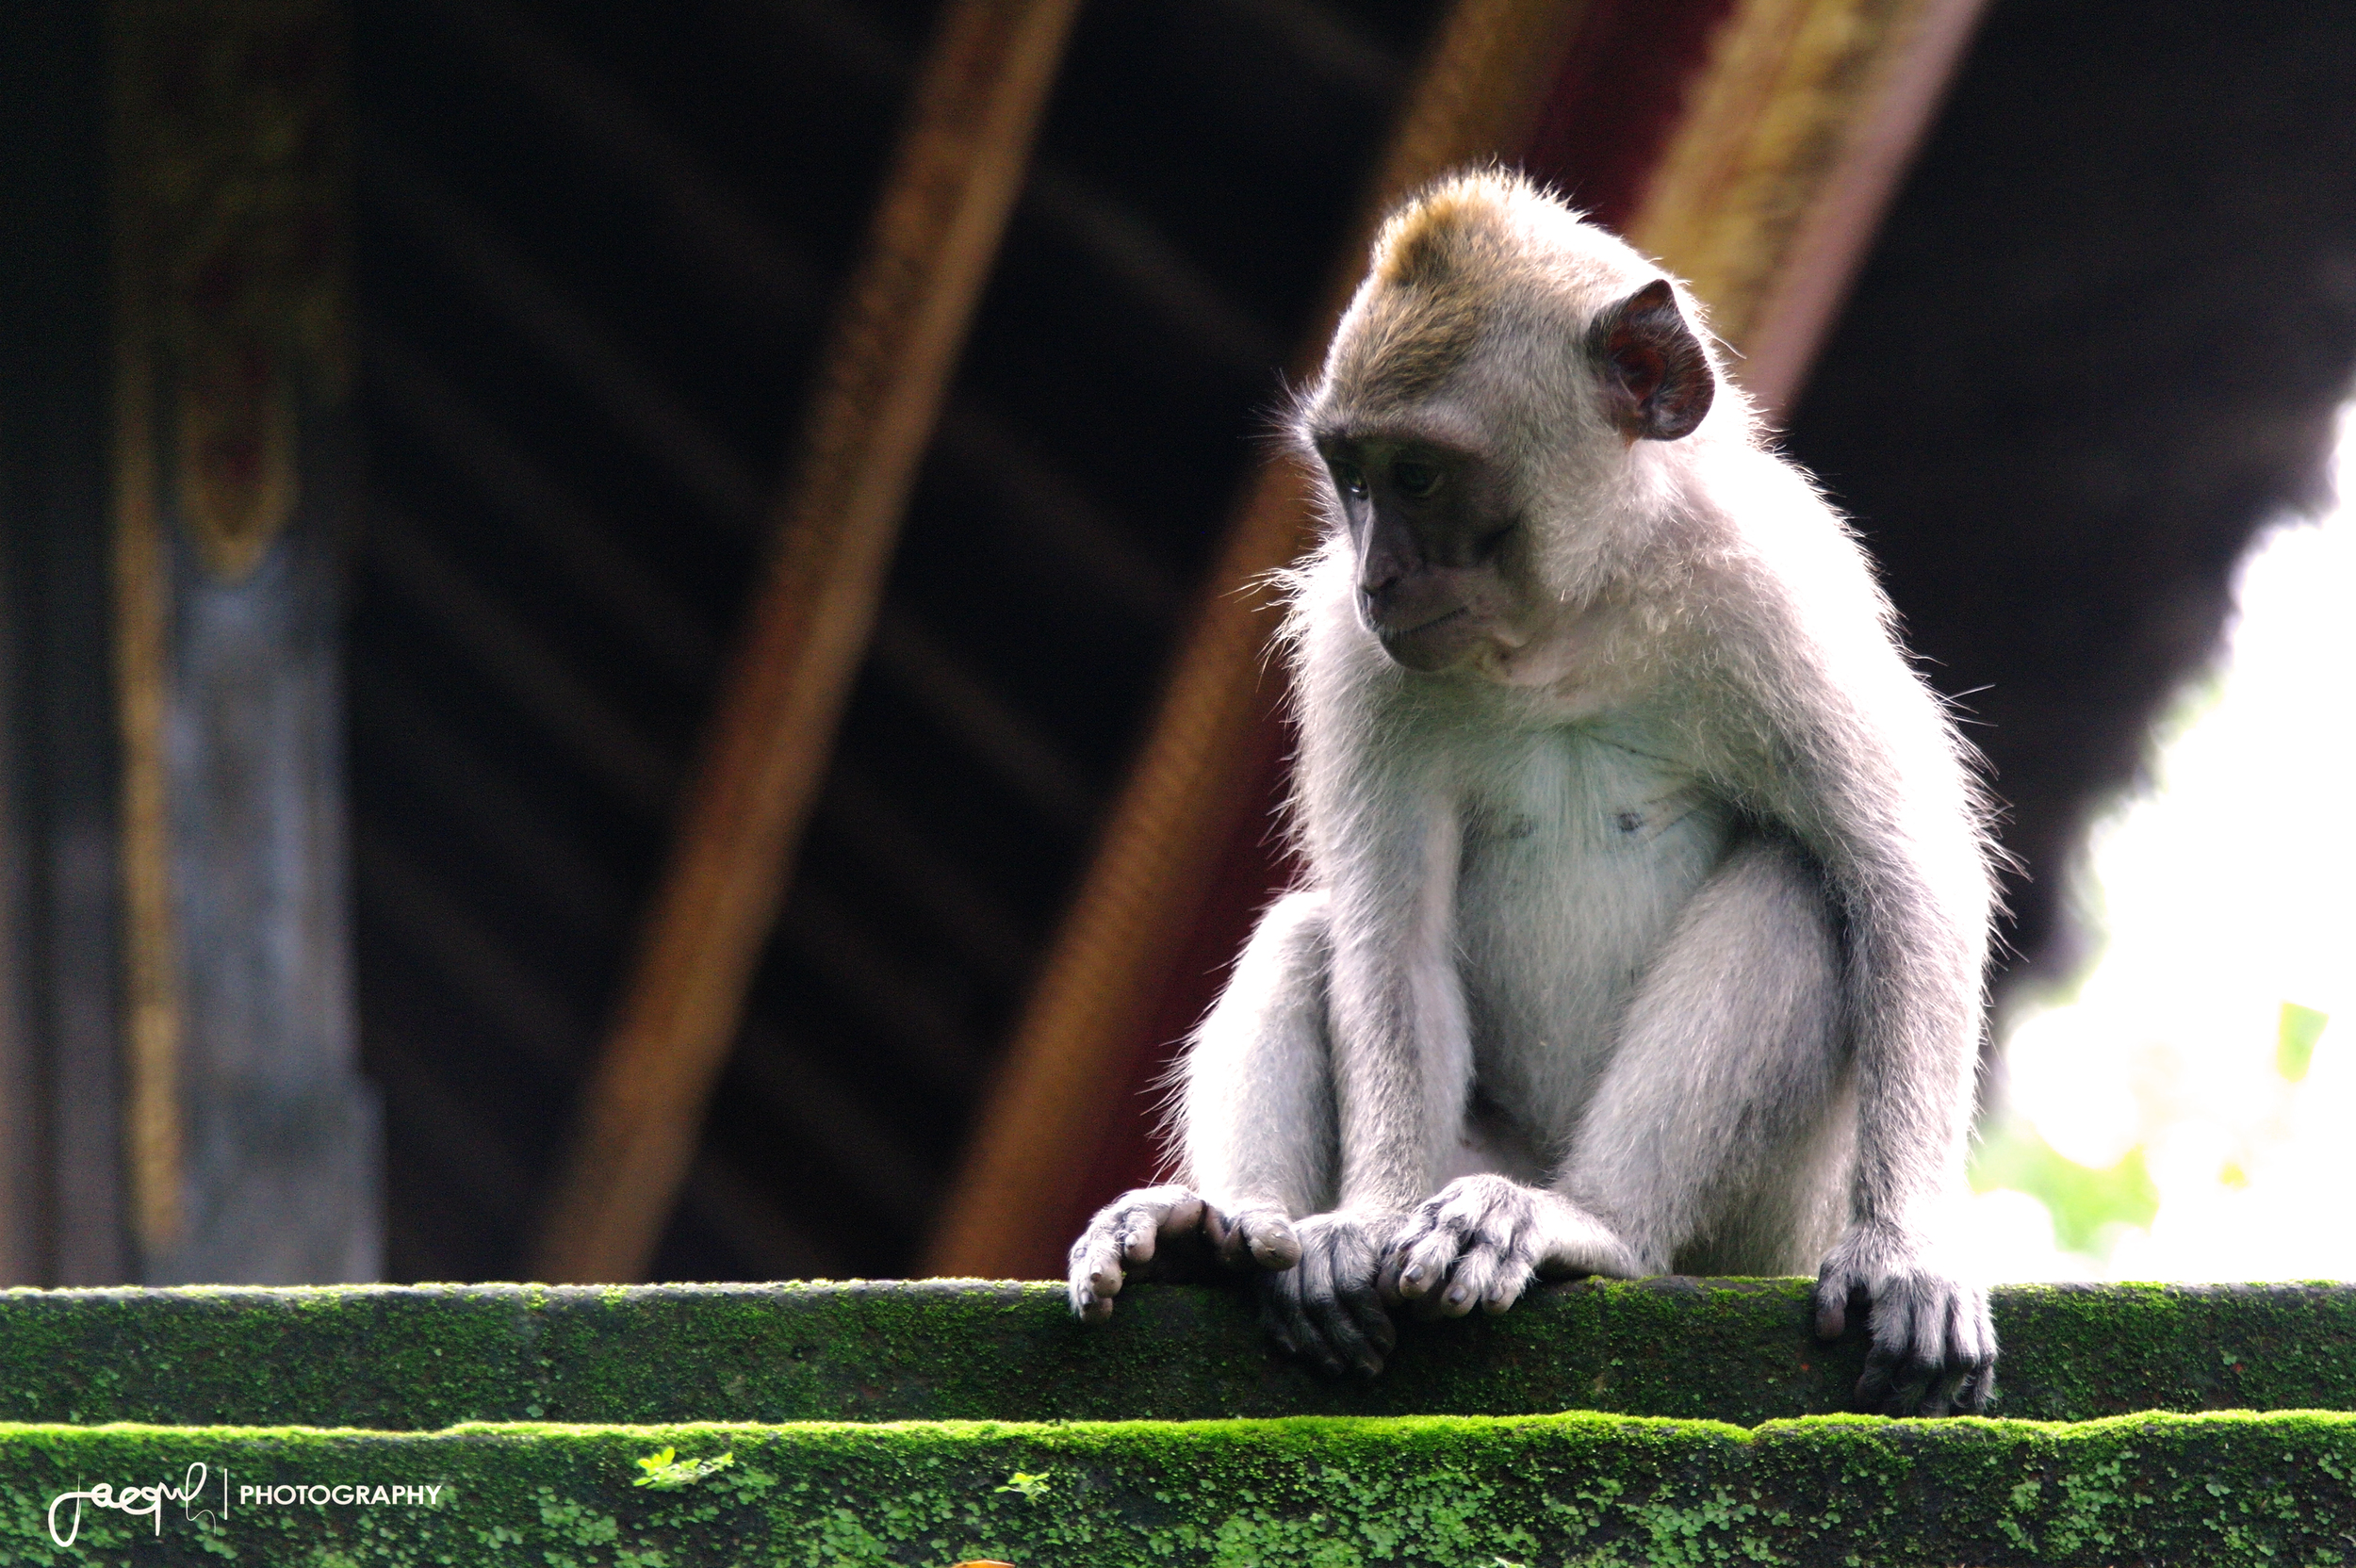  In 2013 I got the opportunity to travel to Indonesia. This photograph was taken in the monkey forest in Ubud, Bali.&nbsp; 